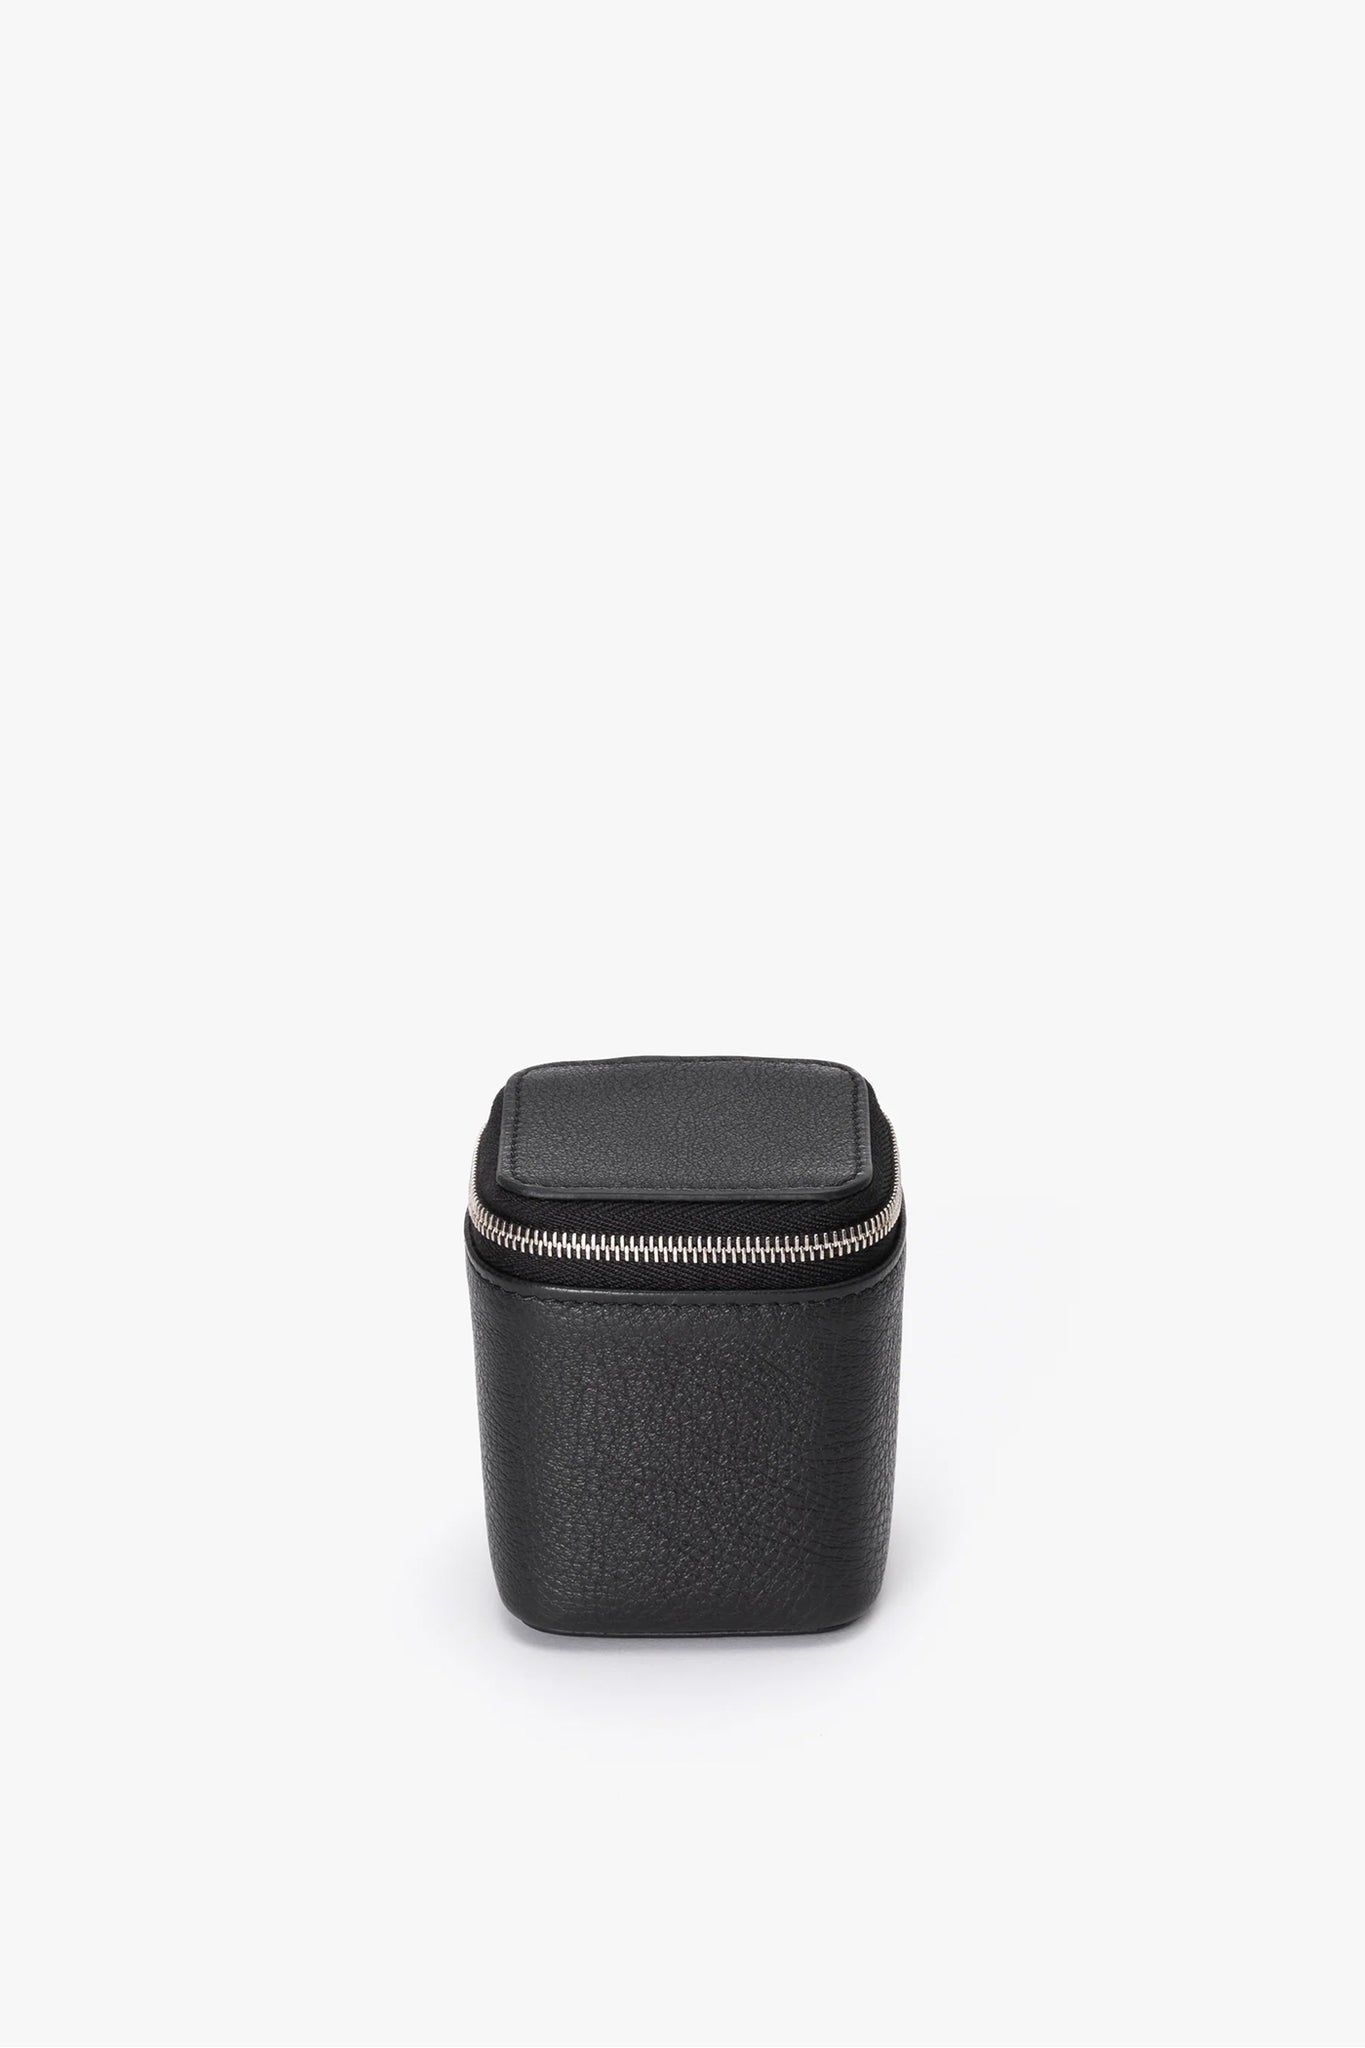 Aeta "PG29  SMALL CONTAINER D / BLACK"